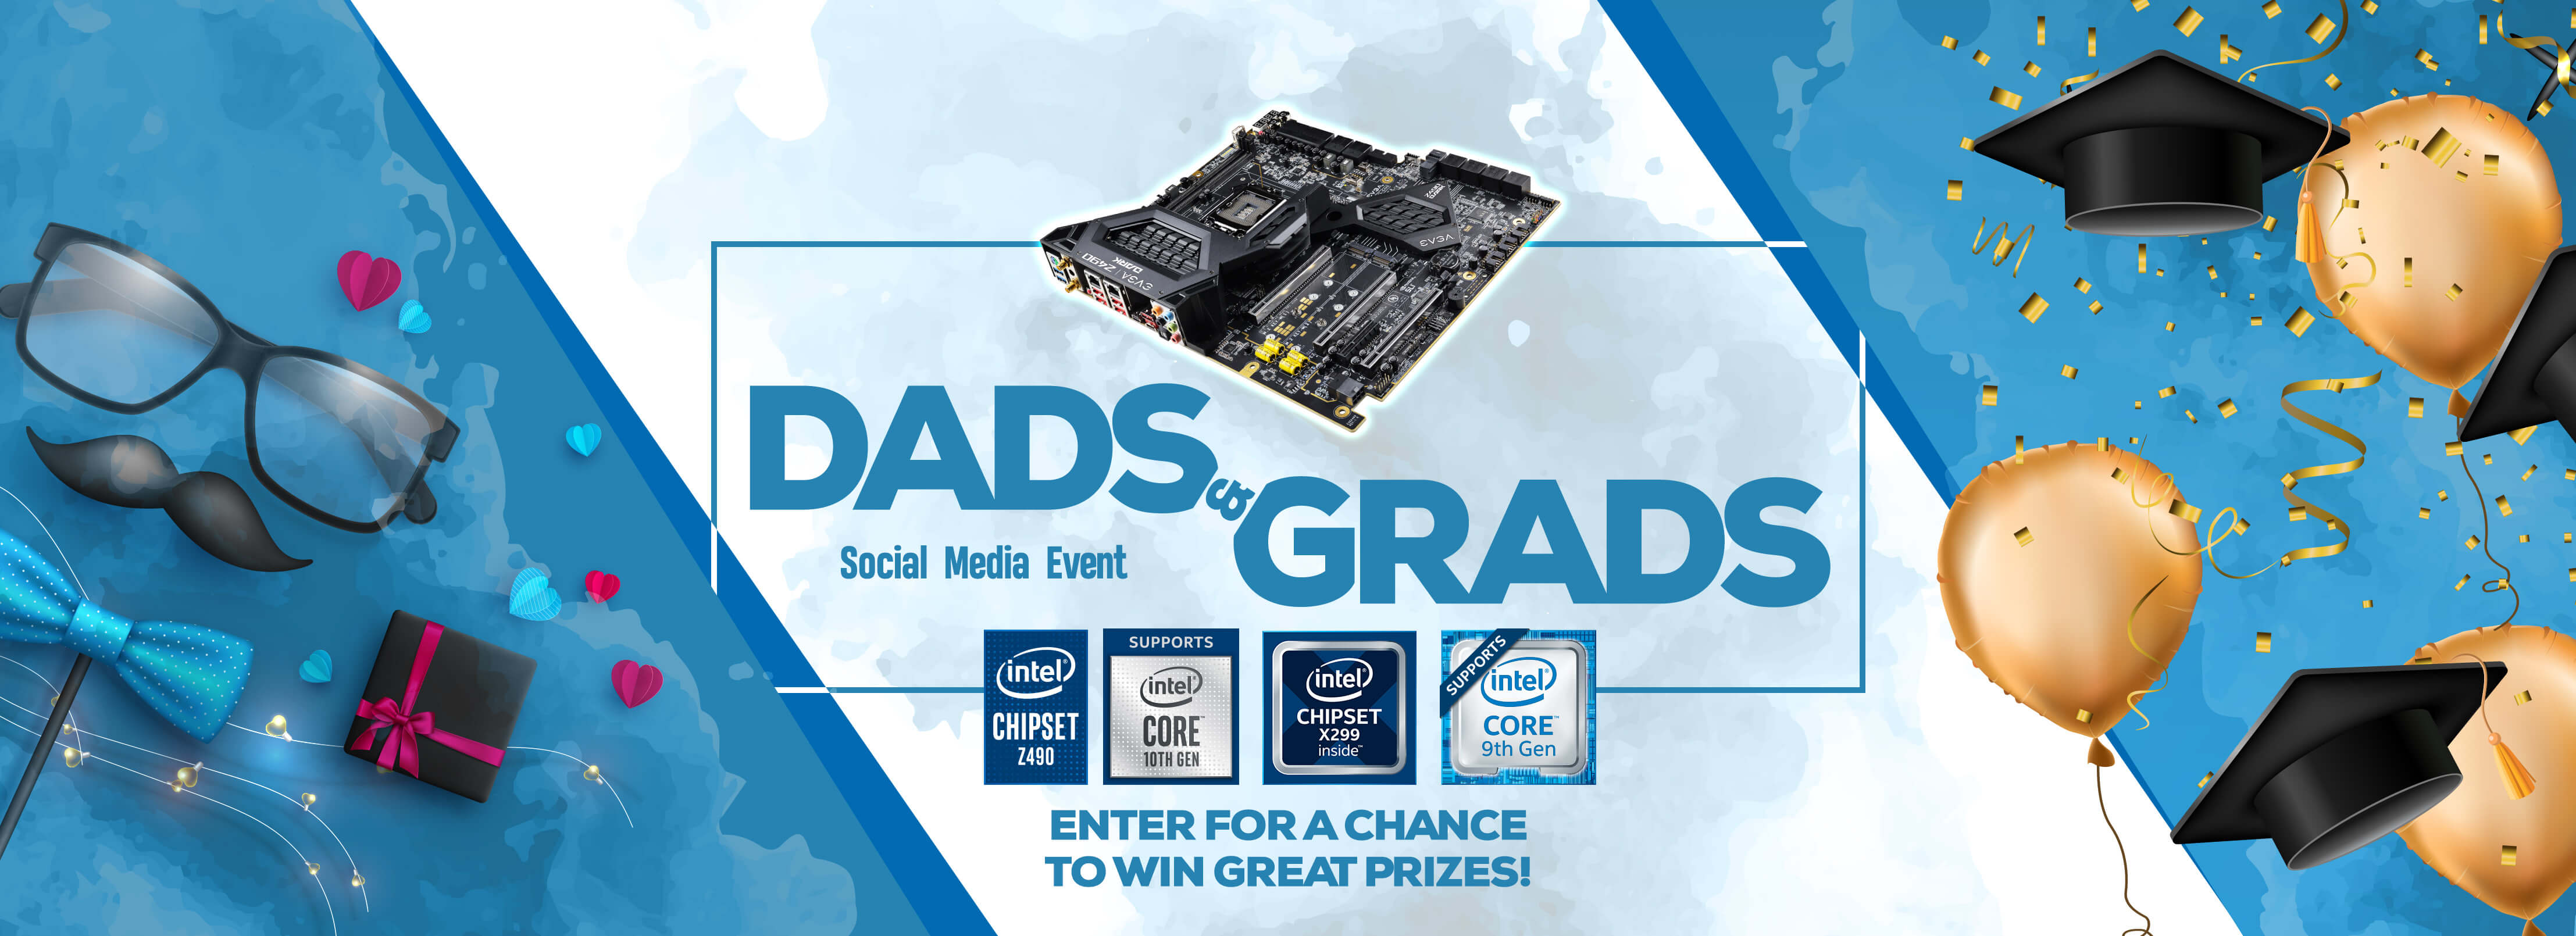 Dads and Grads Social Media Event